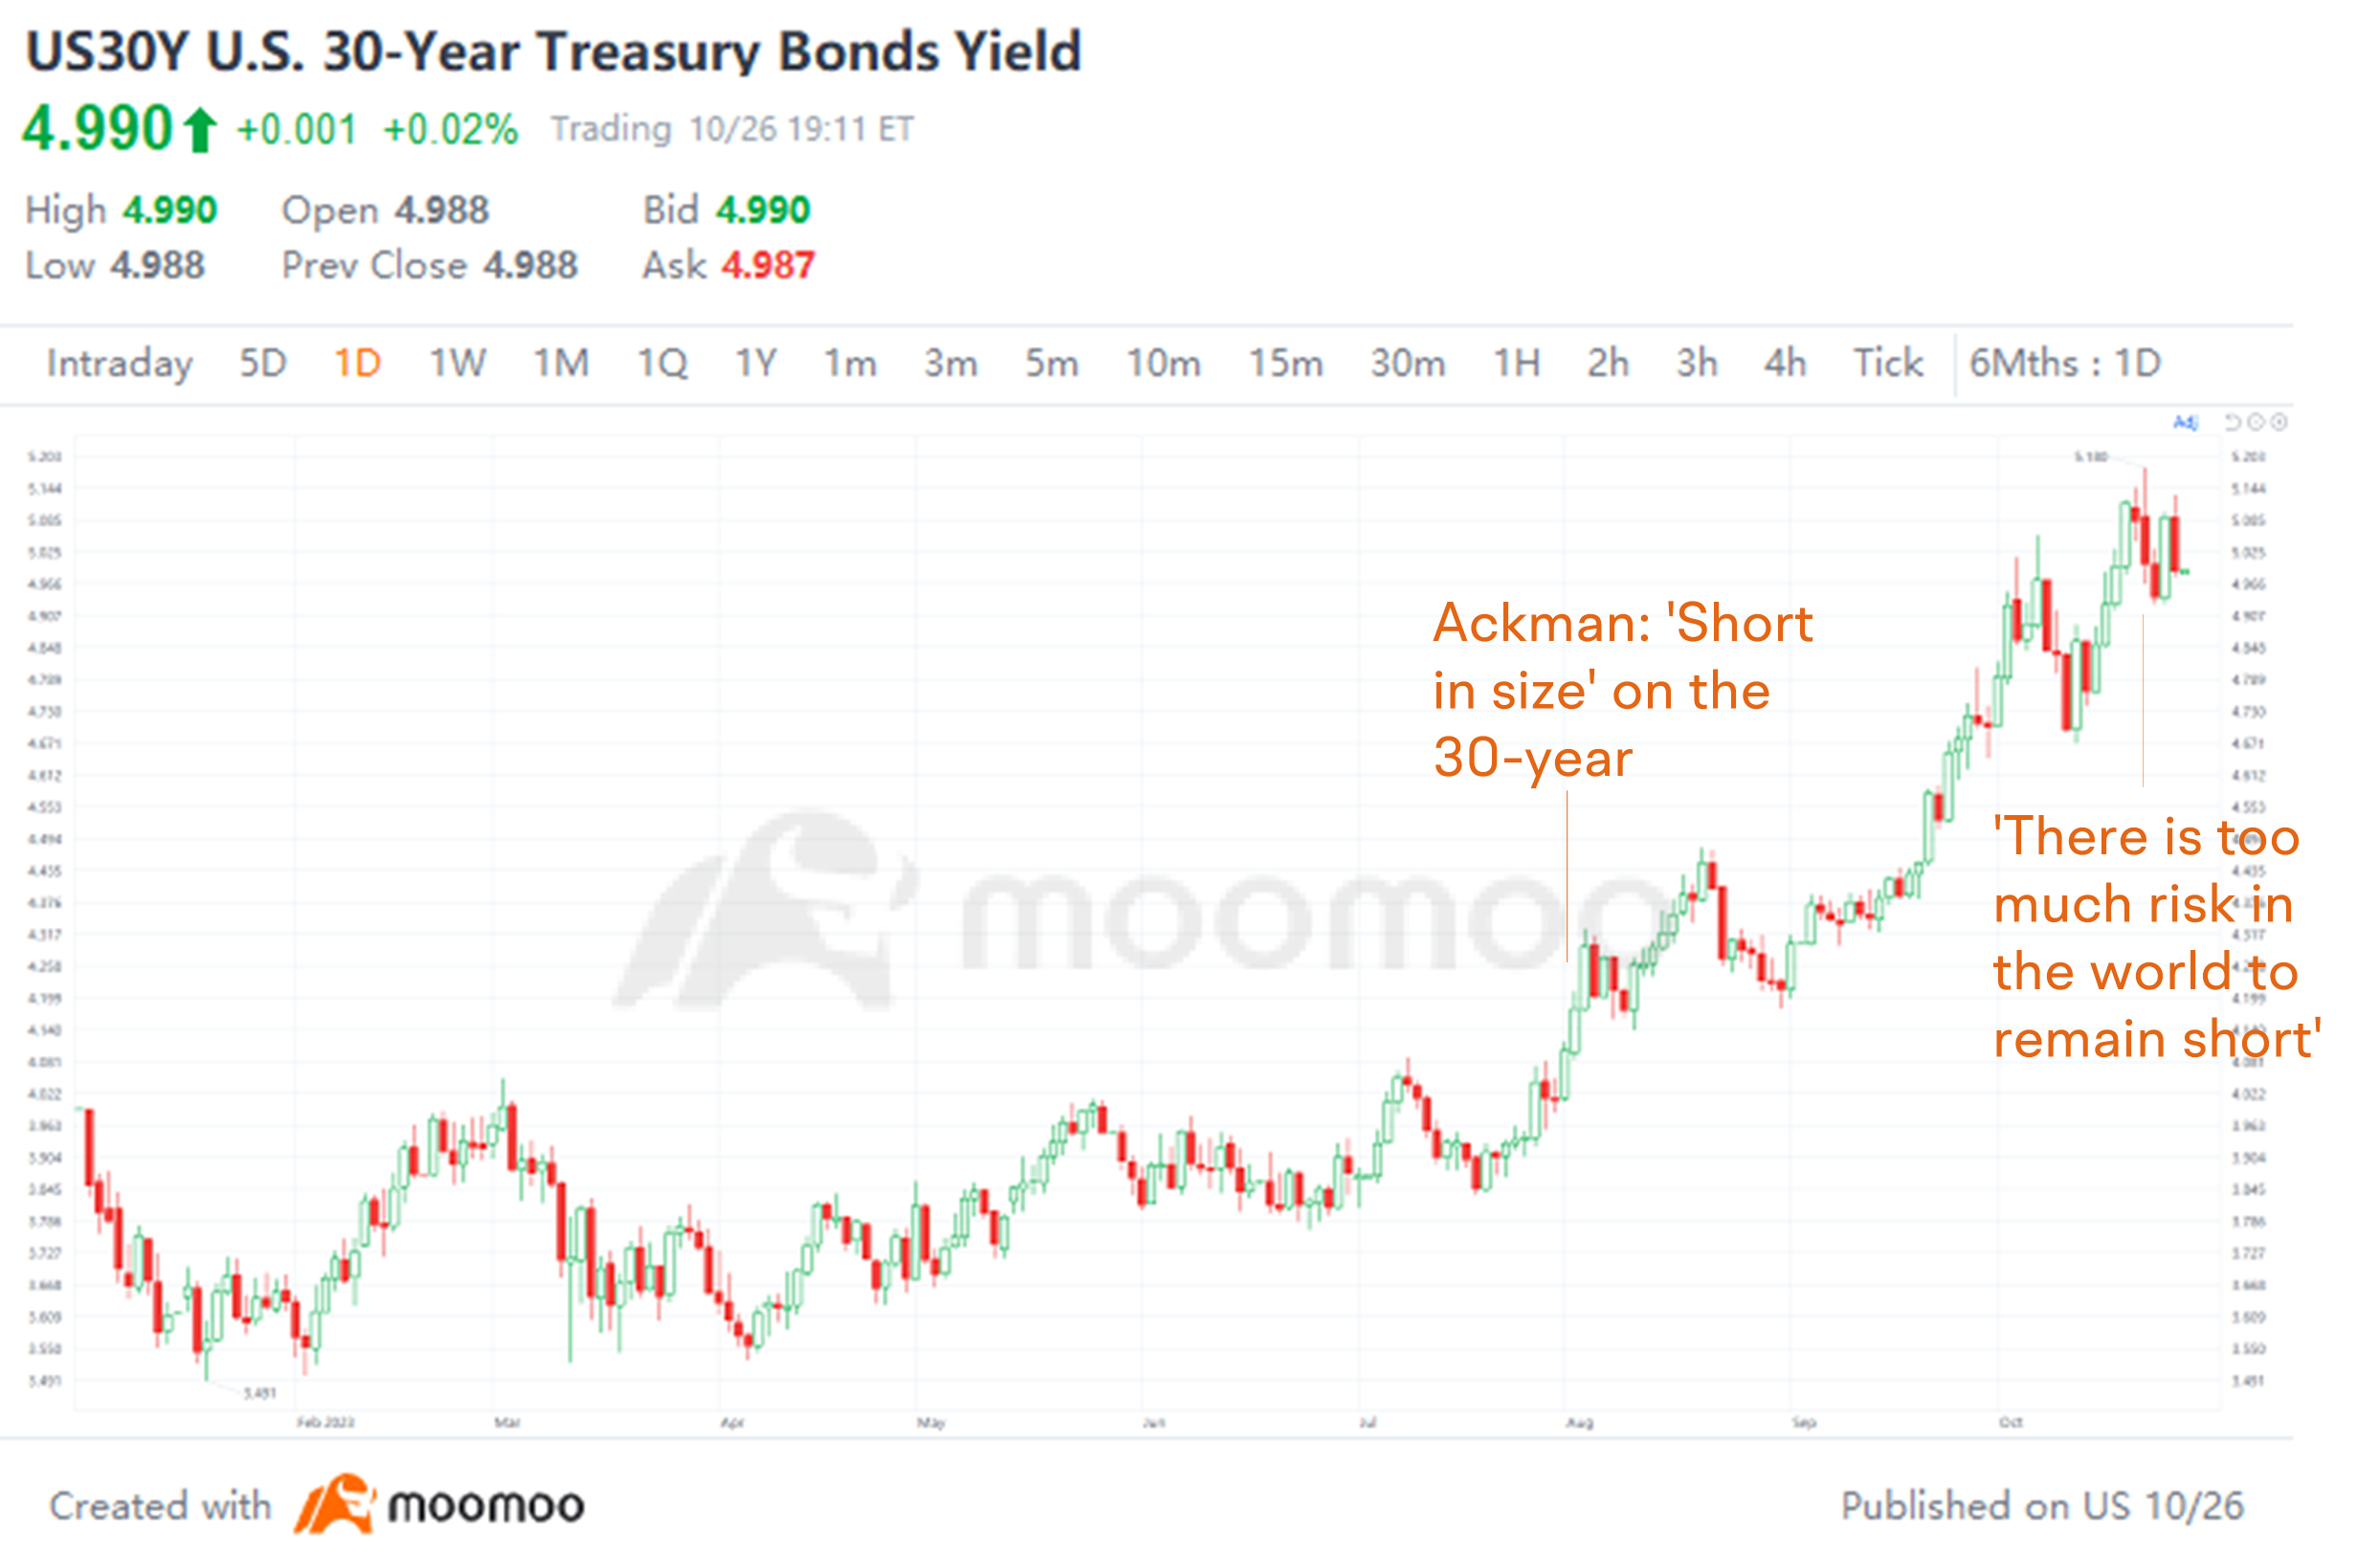 Bill Ackman Pocketed $200Mn in Bets Against US Treasuries. Did He Cash Out at the Right Time?